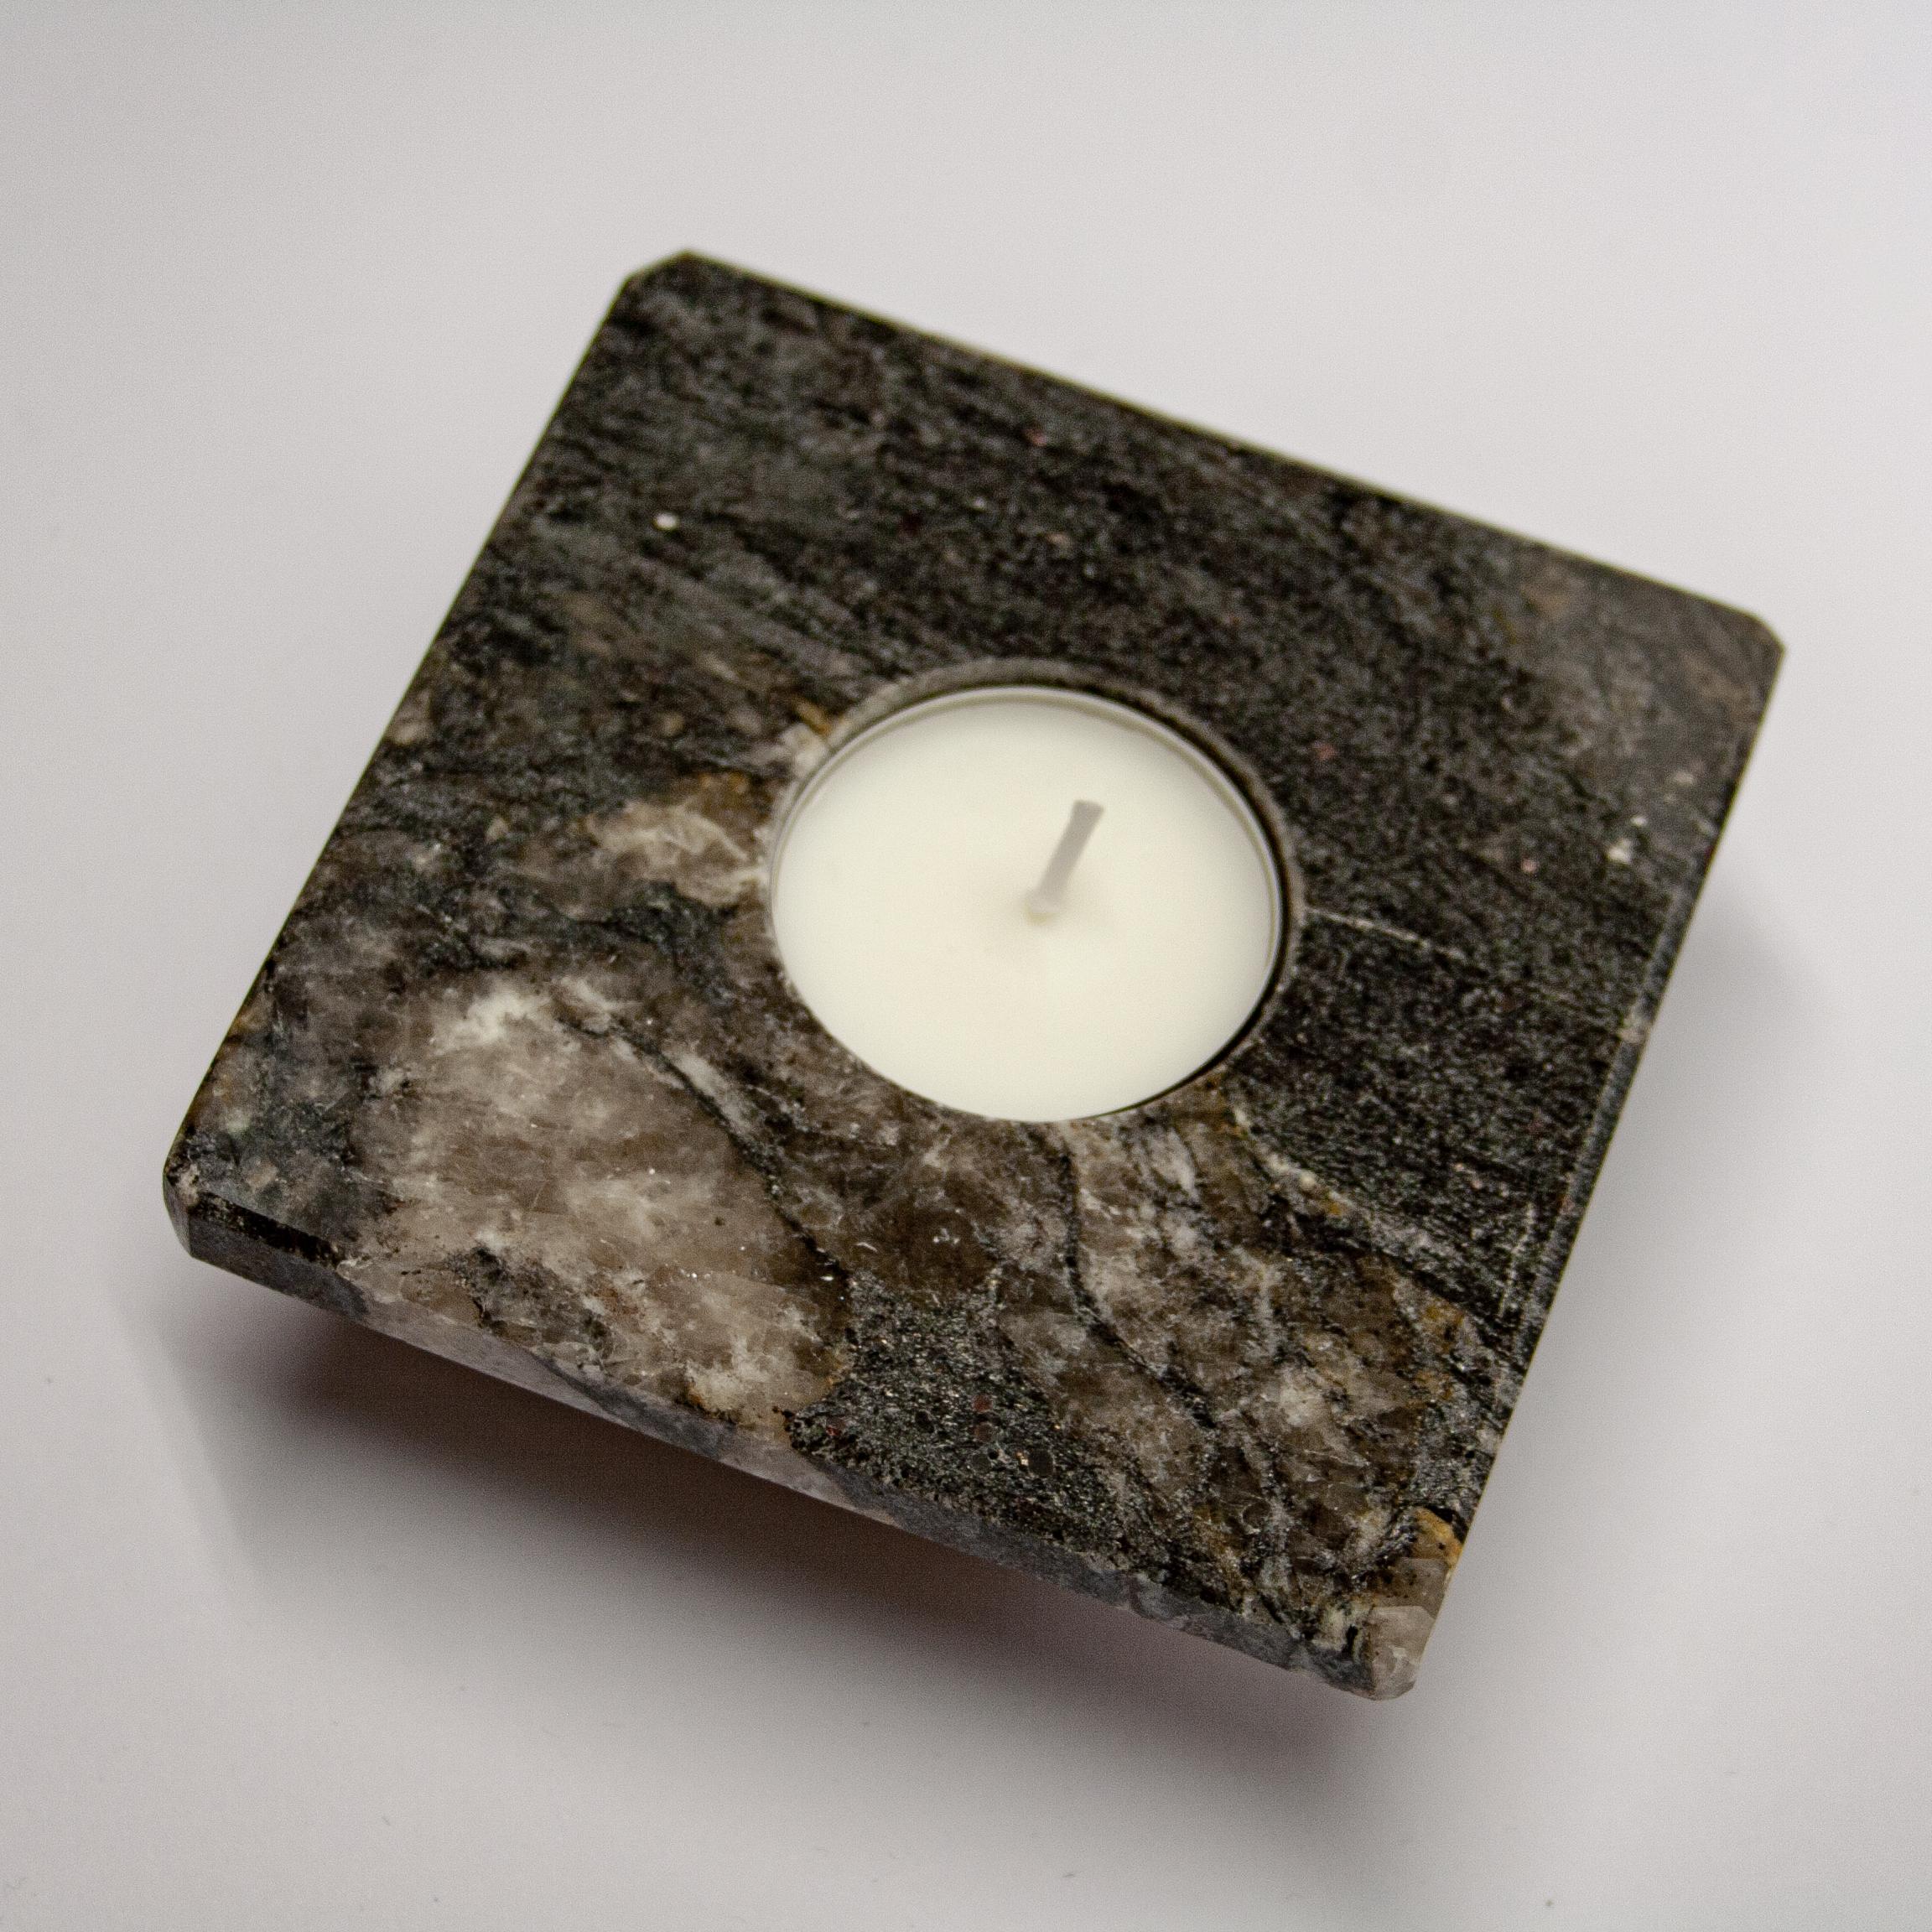 Candle Holder Black Granite White Quartz Geode Inlay Unique Mother’s Day Gift.
This decorative object is a marble candle holder is a unique piece as it is a piece of granite with a geode inside and visible on the surface of the candle holder. An